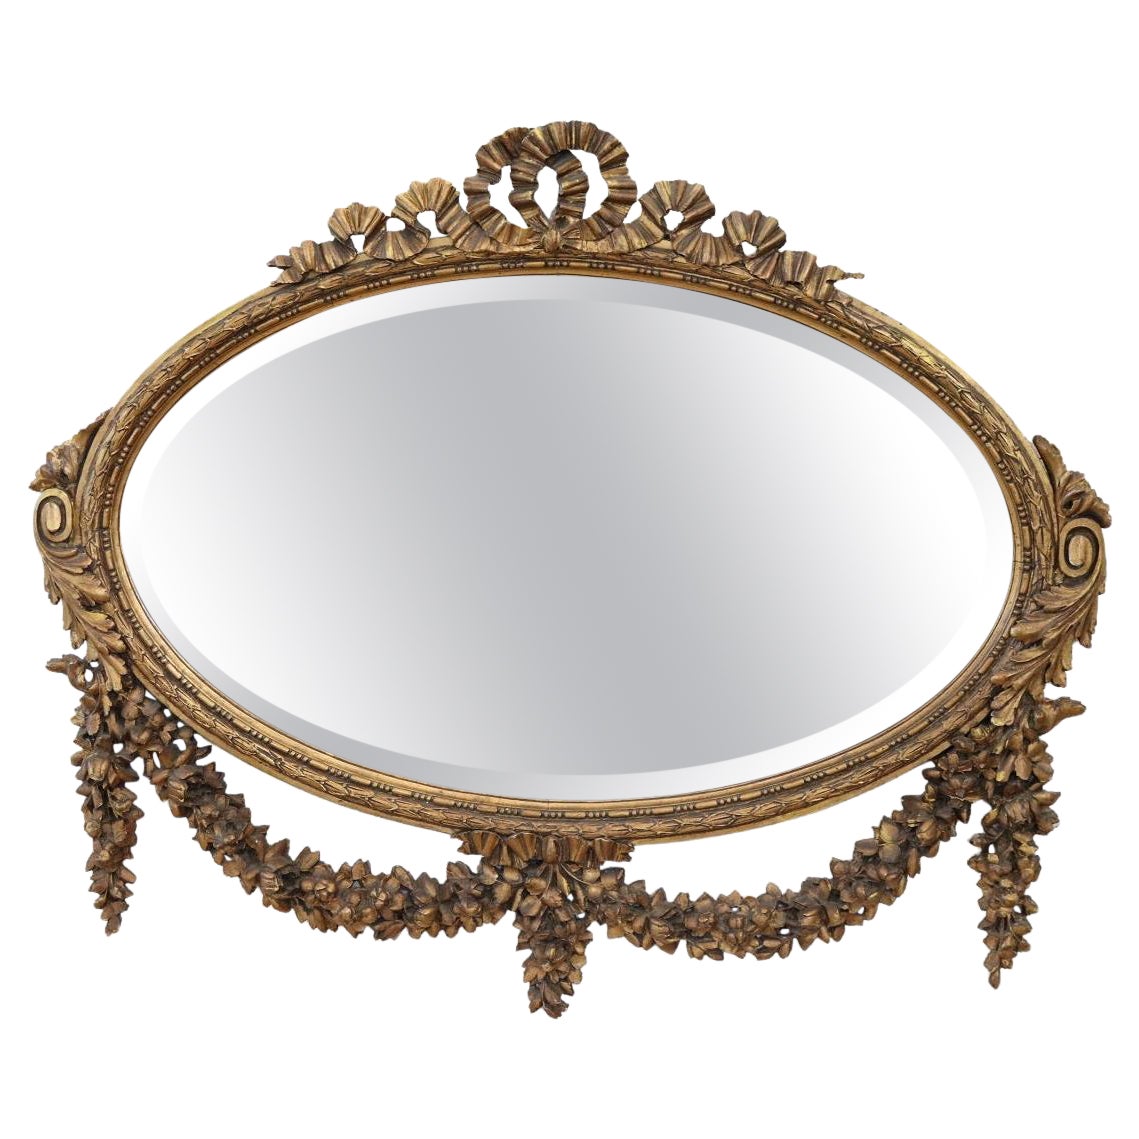 Early 20th Century Louis XVI Style Carved and Gilded Wood Oval Wall Mirror